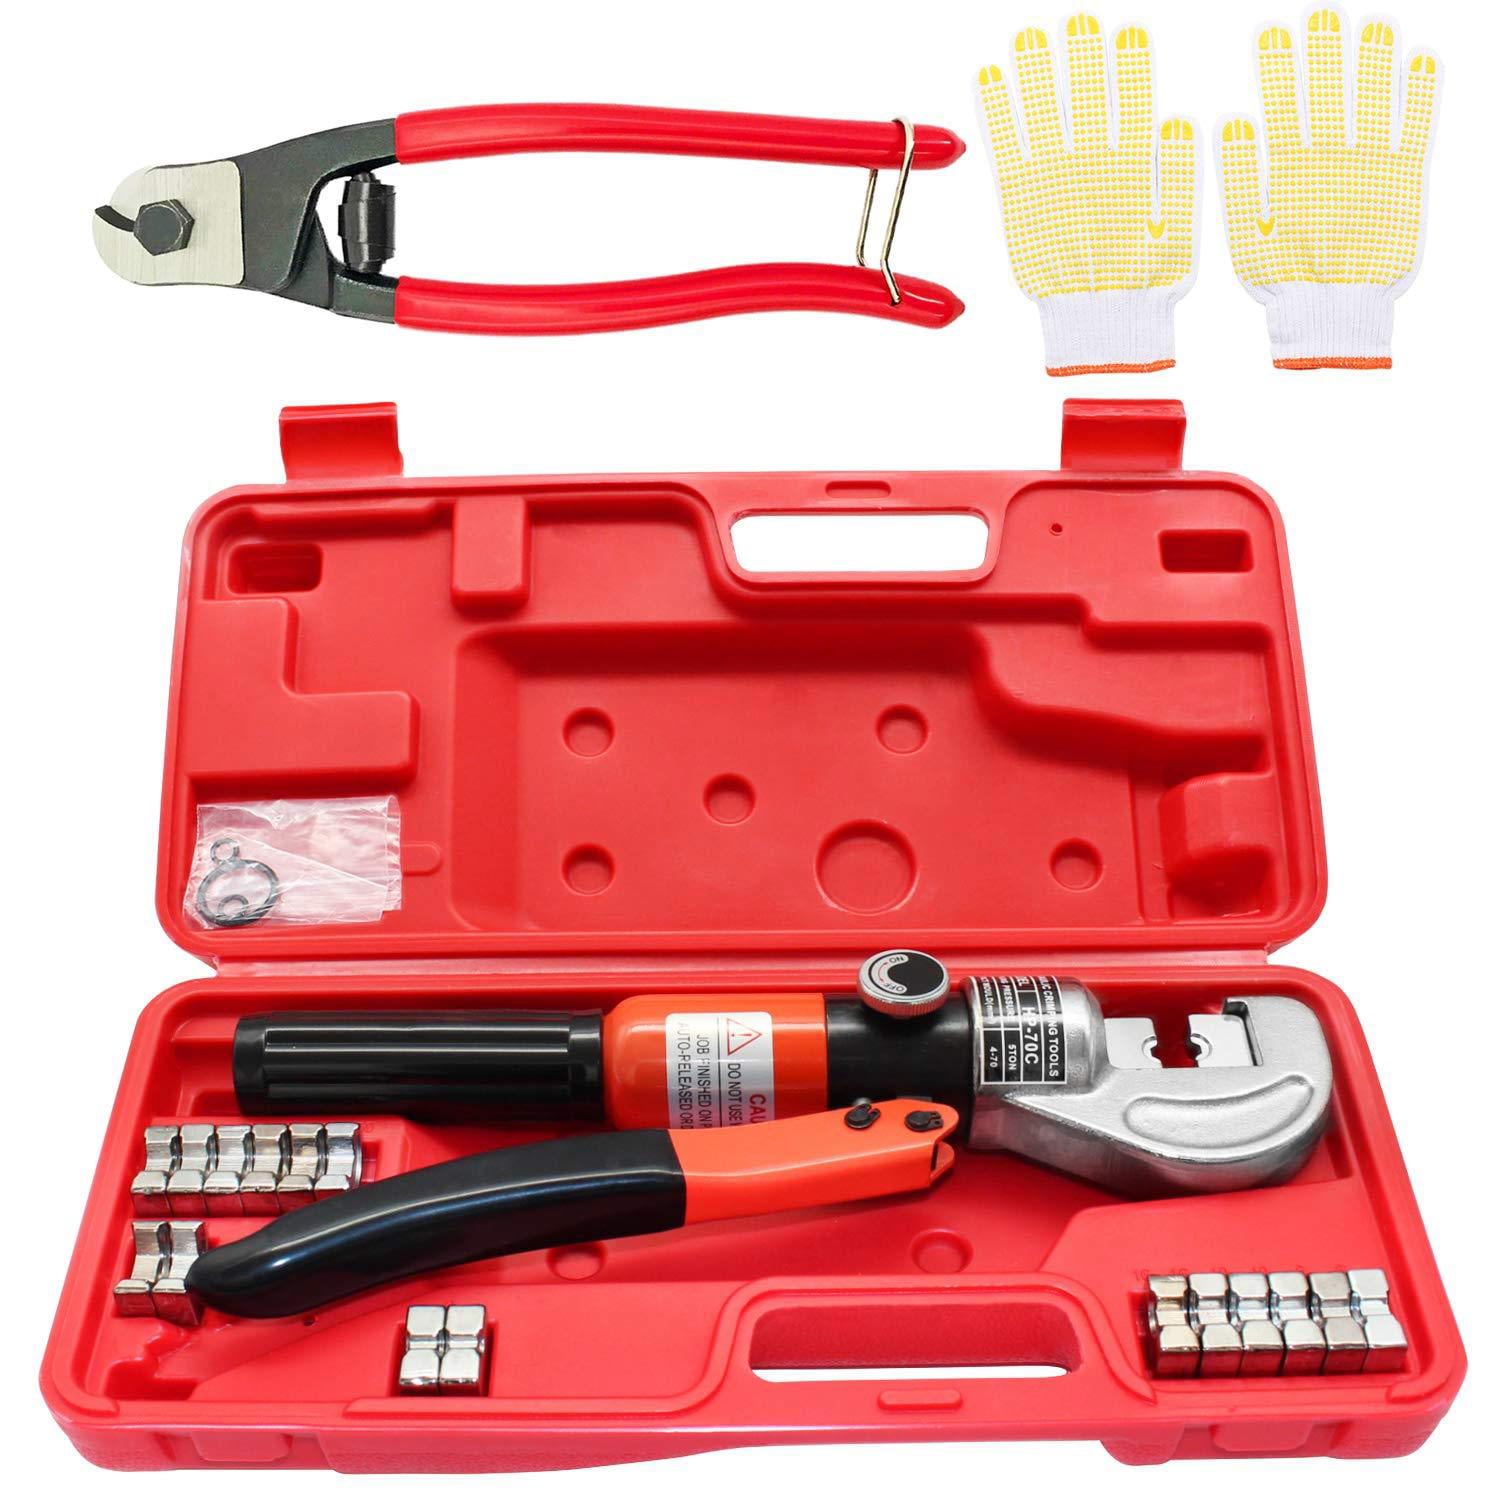 Hydraulic Hand Crimper Tool Hydraulic Wire Crimping Tool Work Gloves Carrying Case 9 set Dies Hydraulic Crimping Tools Cable Cutter 10 Ton Cable Crimper Cable Crimper Kit